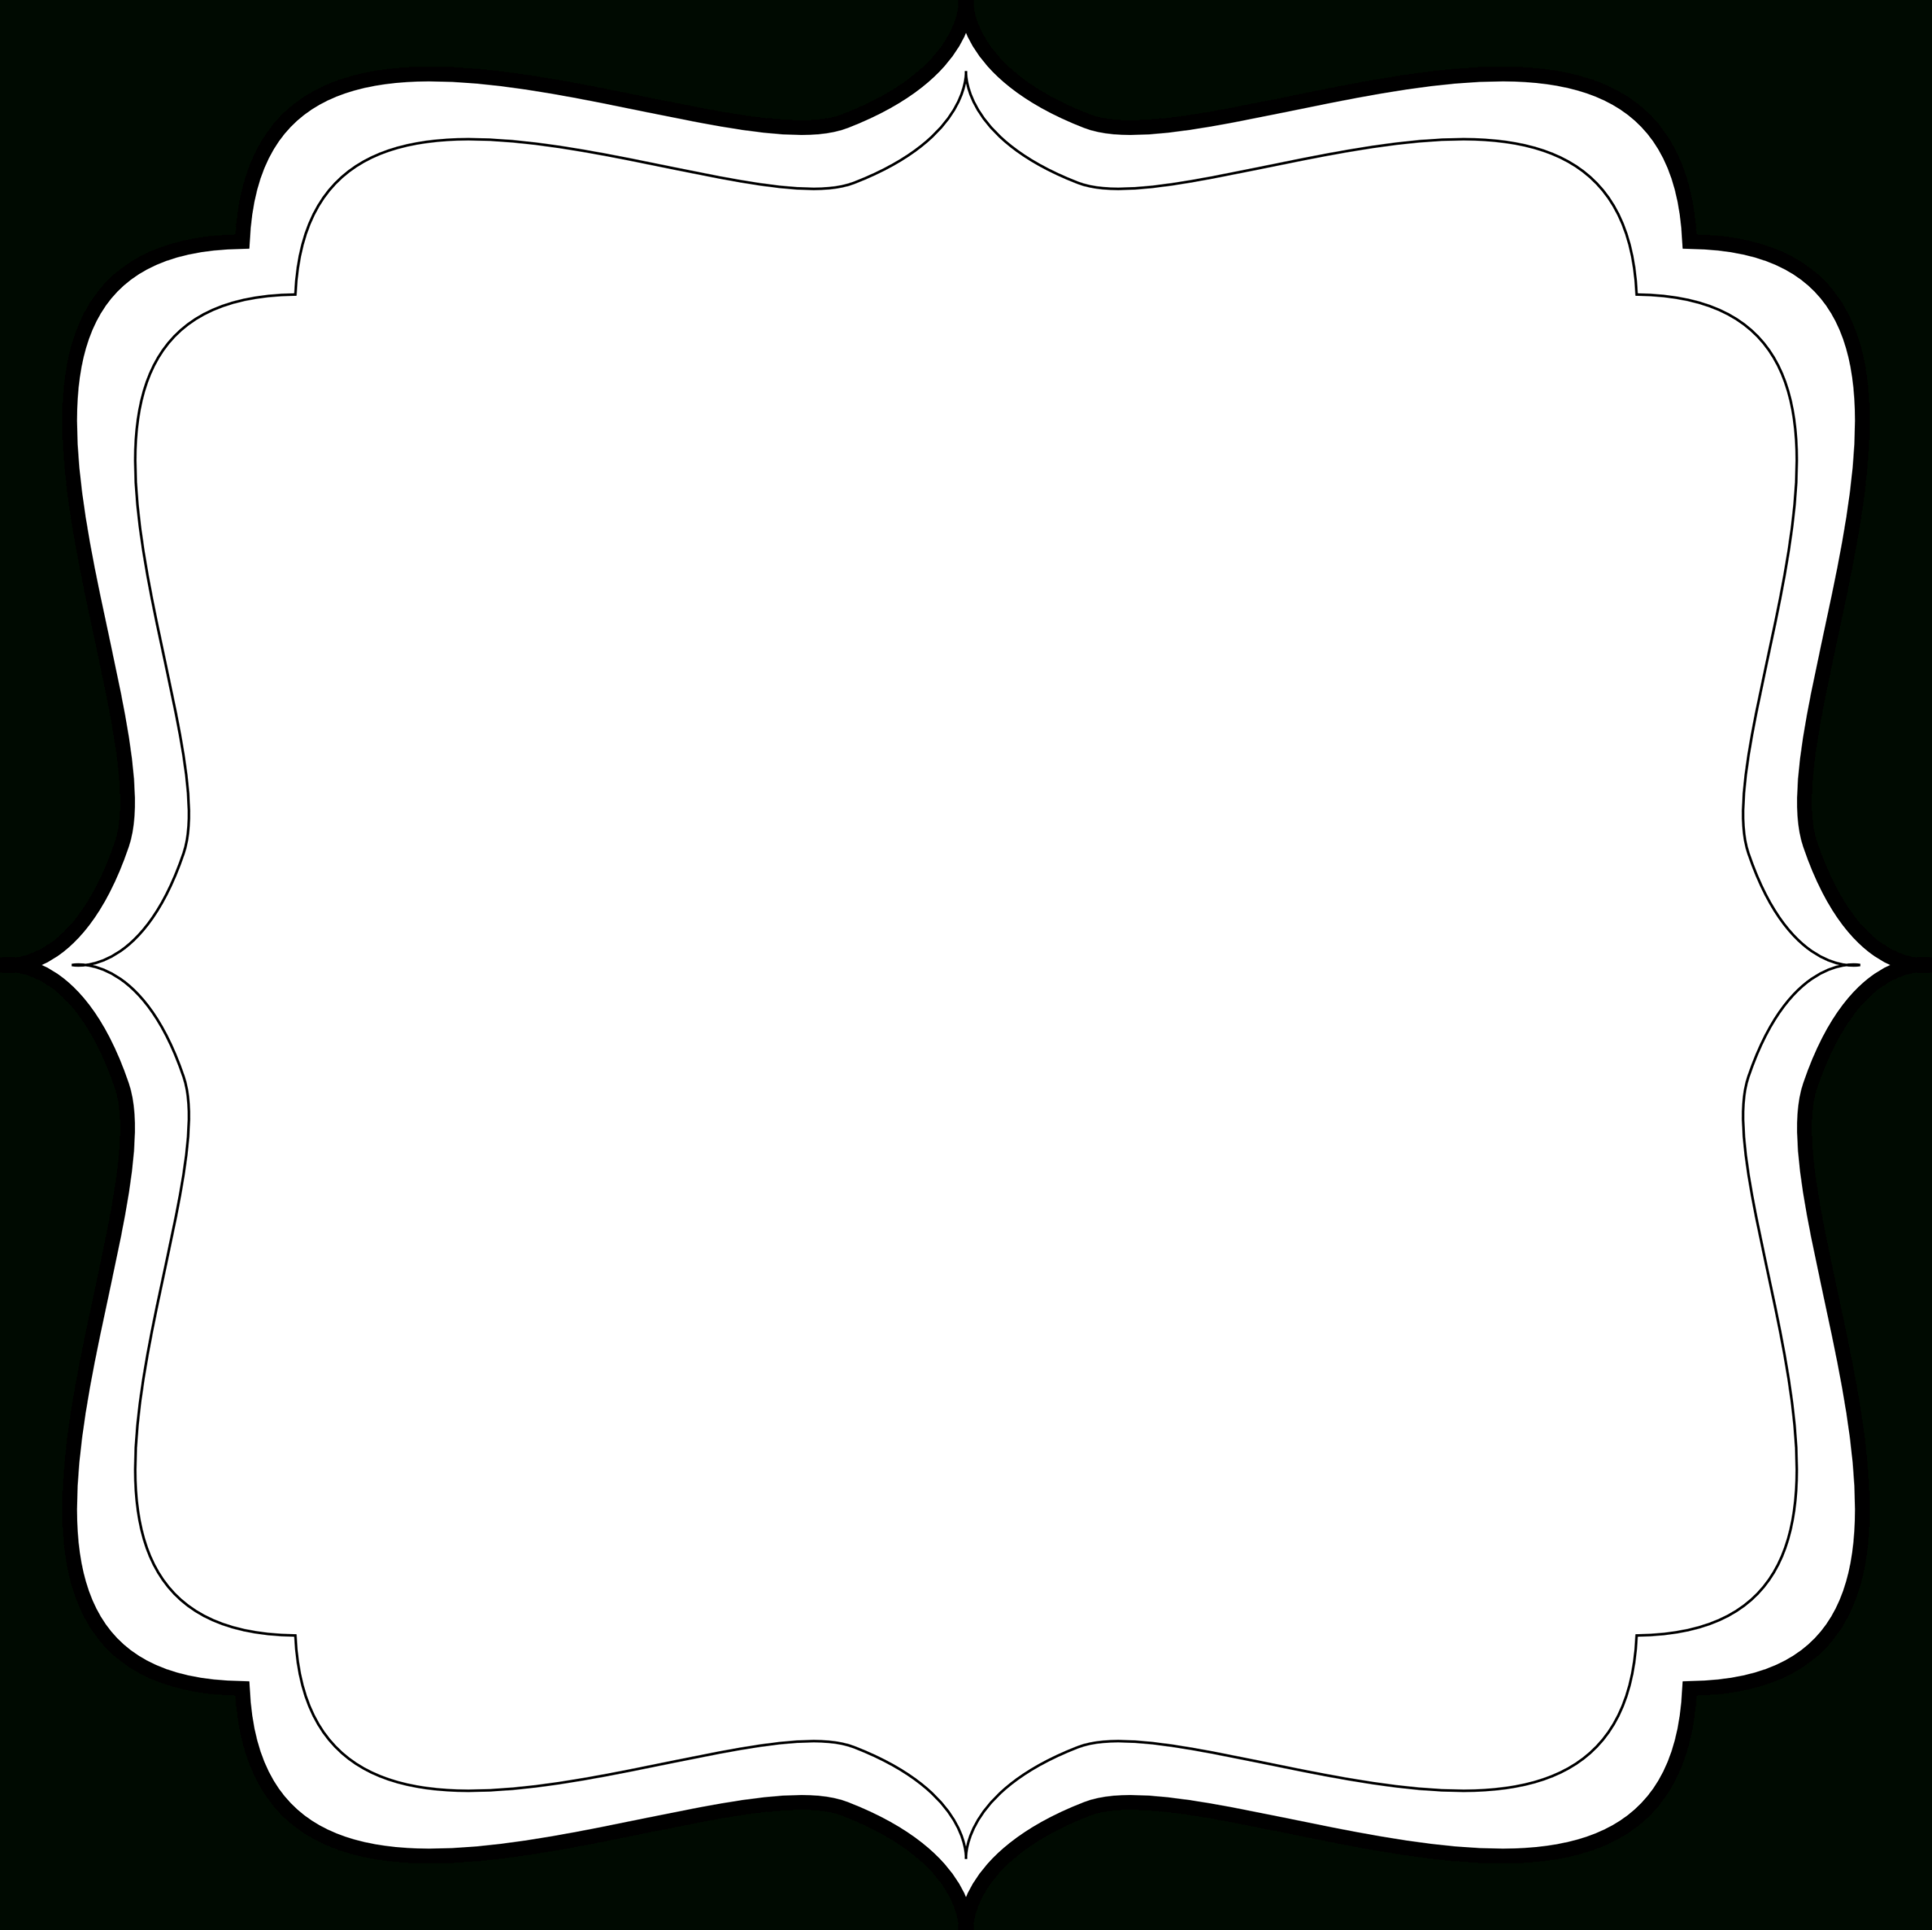 Fancy Label Templates Png, Picture #723275 Fancy Label Throughout Black And White Label Templates